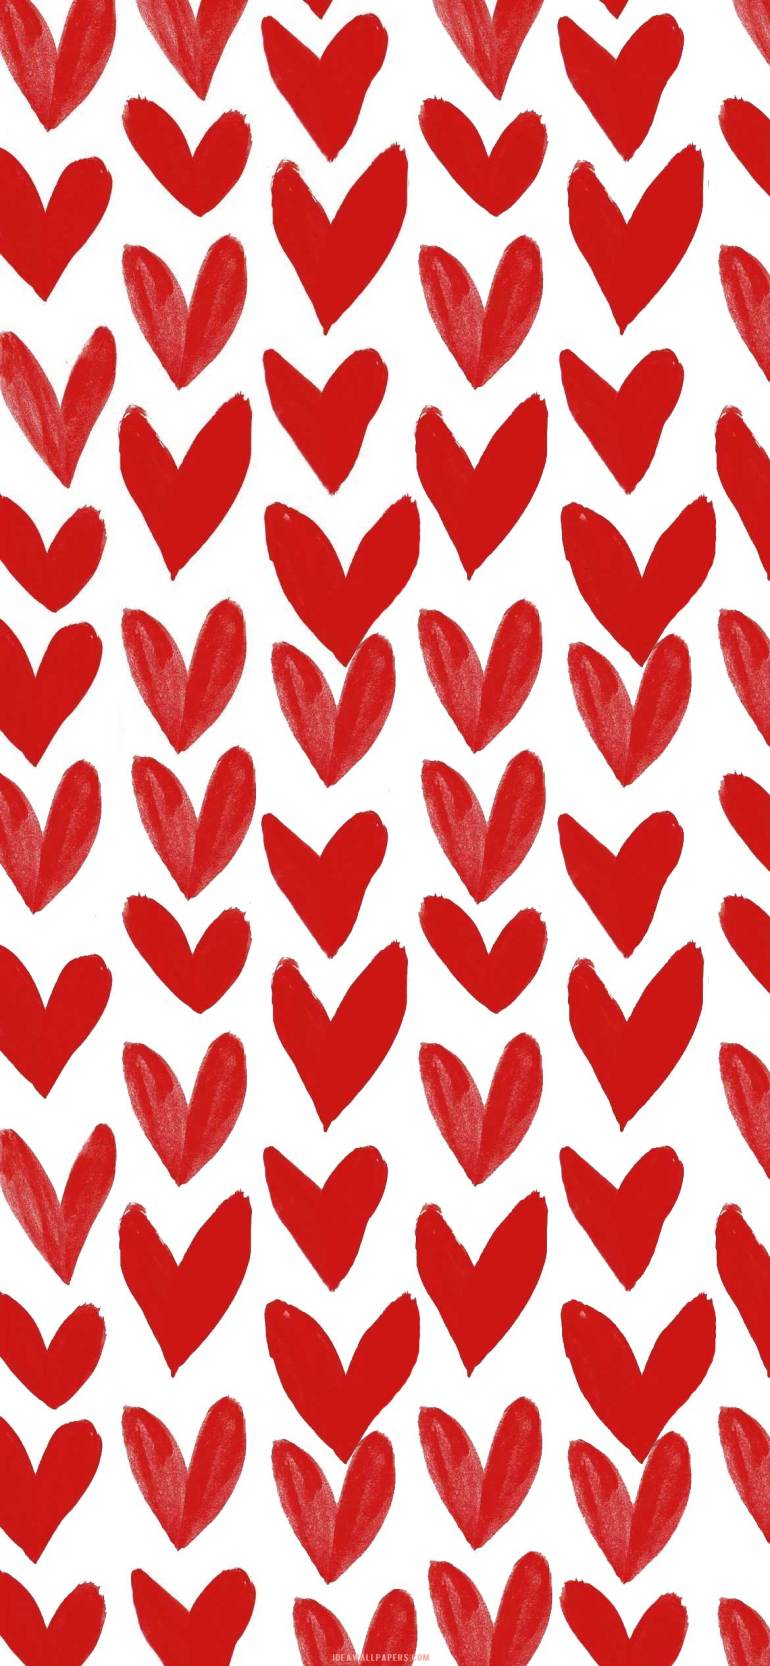 A pattern of red hearts on white background - Illustration